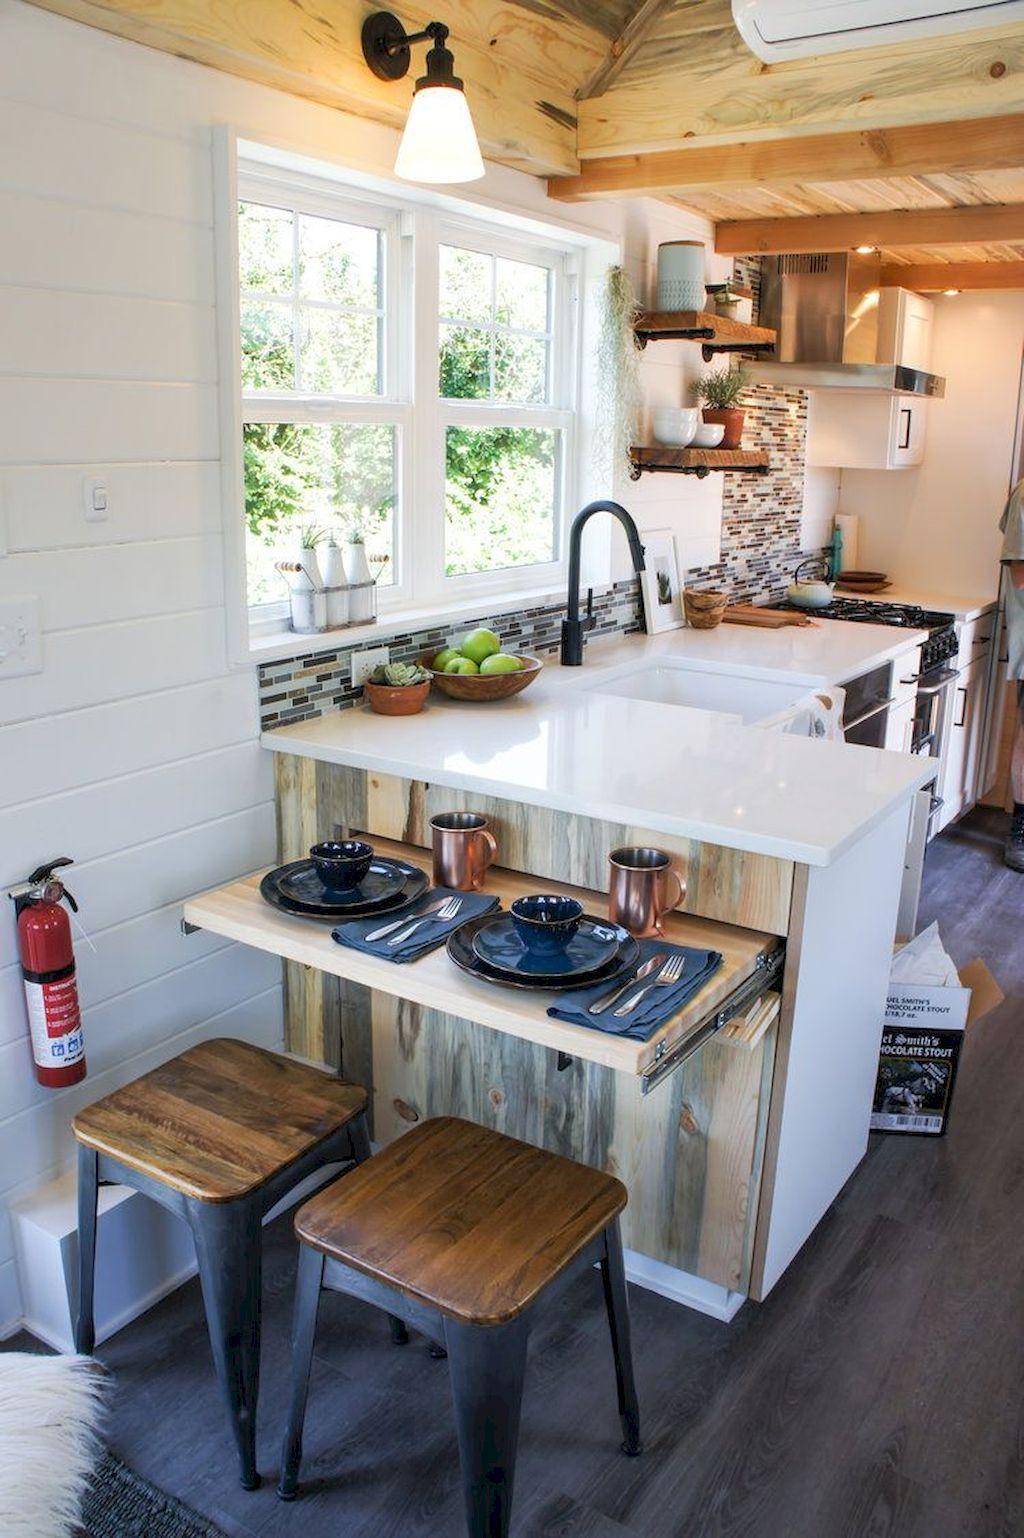 Small House Kitchen Awesome the 11 Tiny House Kitchens that Ll Make You Rethink Big